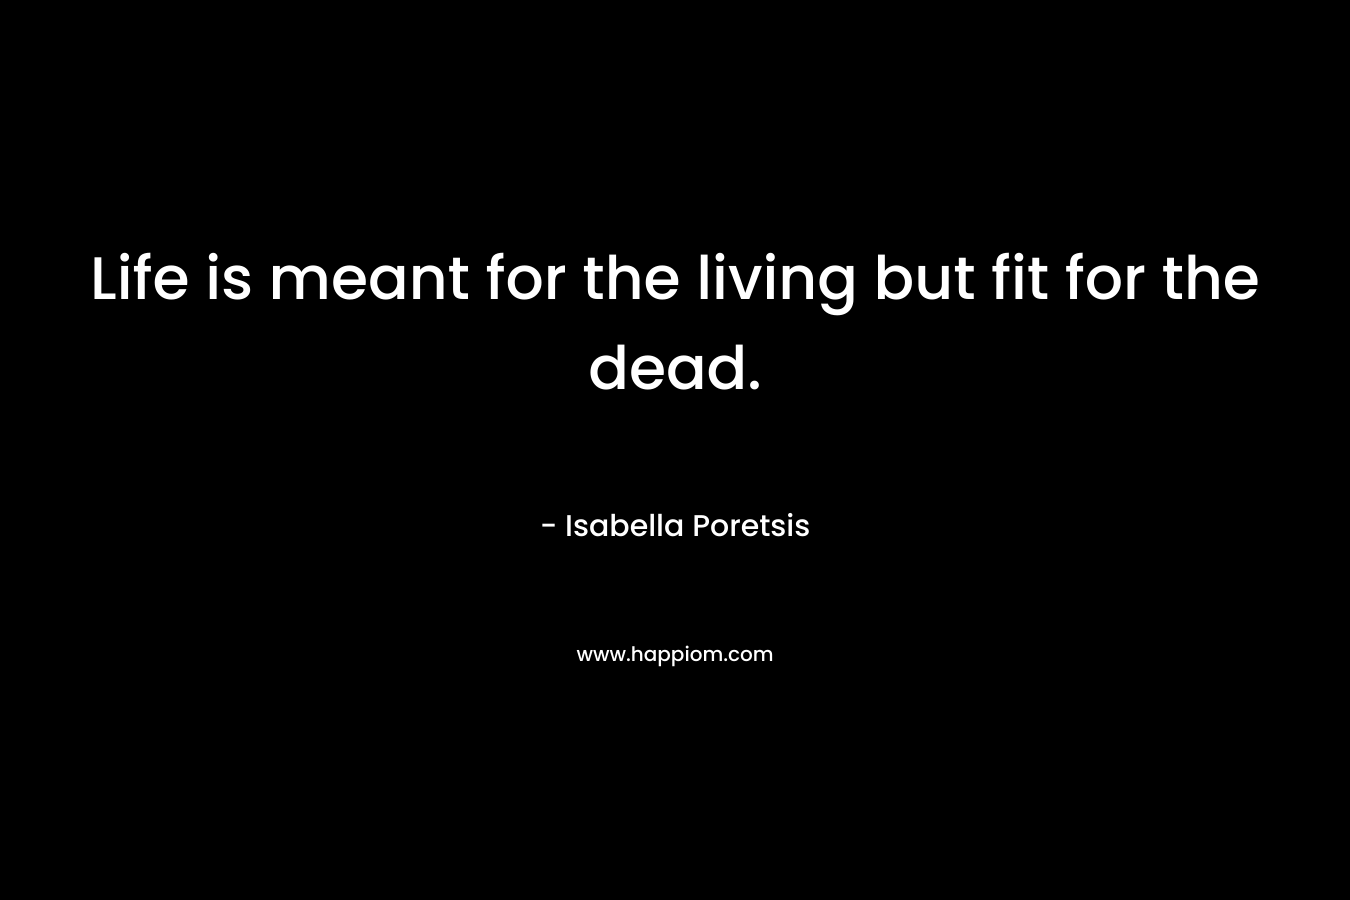 Life is meant for the living but fit for the dead. – Isabella Poretsis